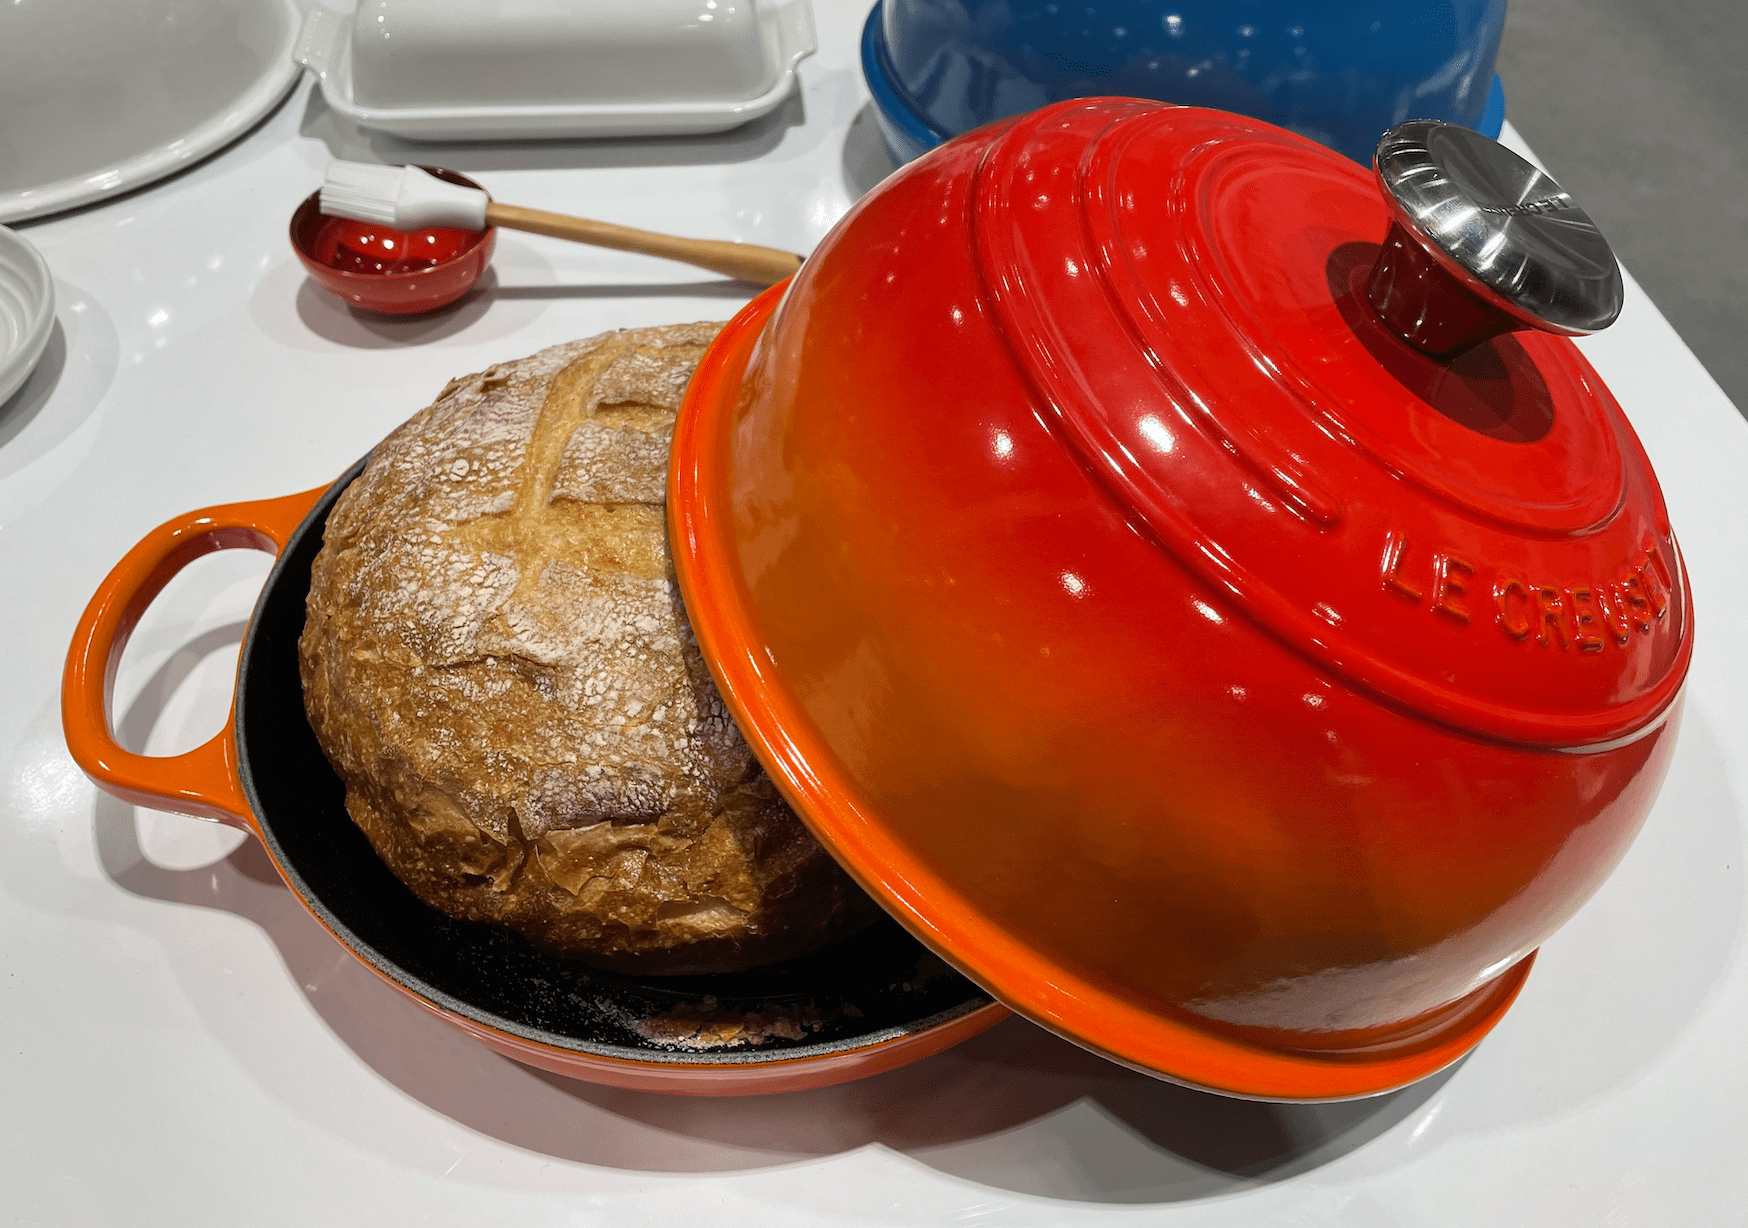 Challenger Bread Pan Review (Vs Lodge Dutch Oven): Worth Buying